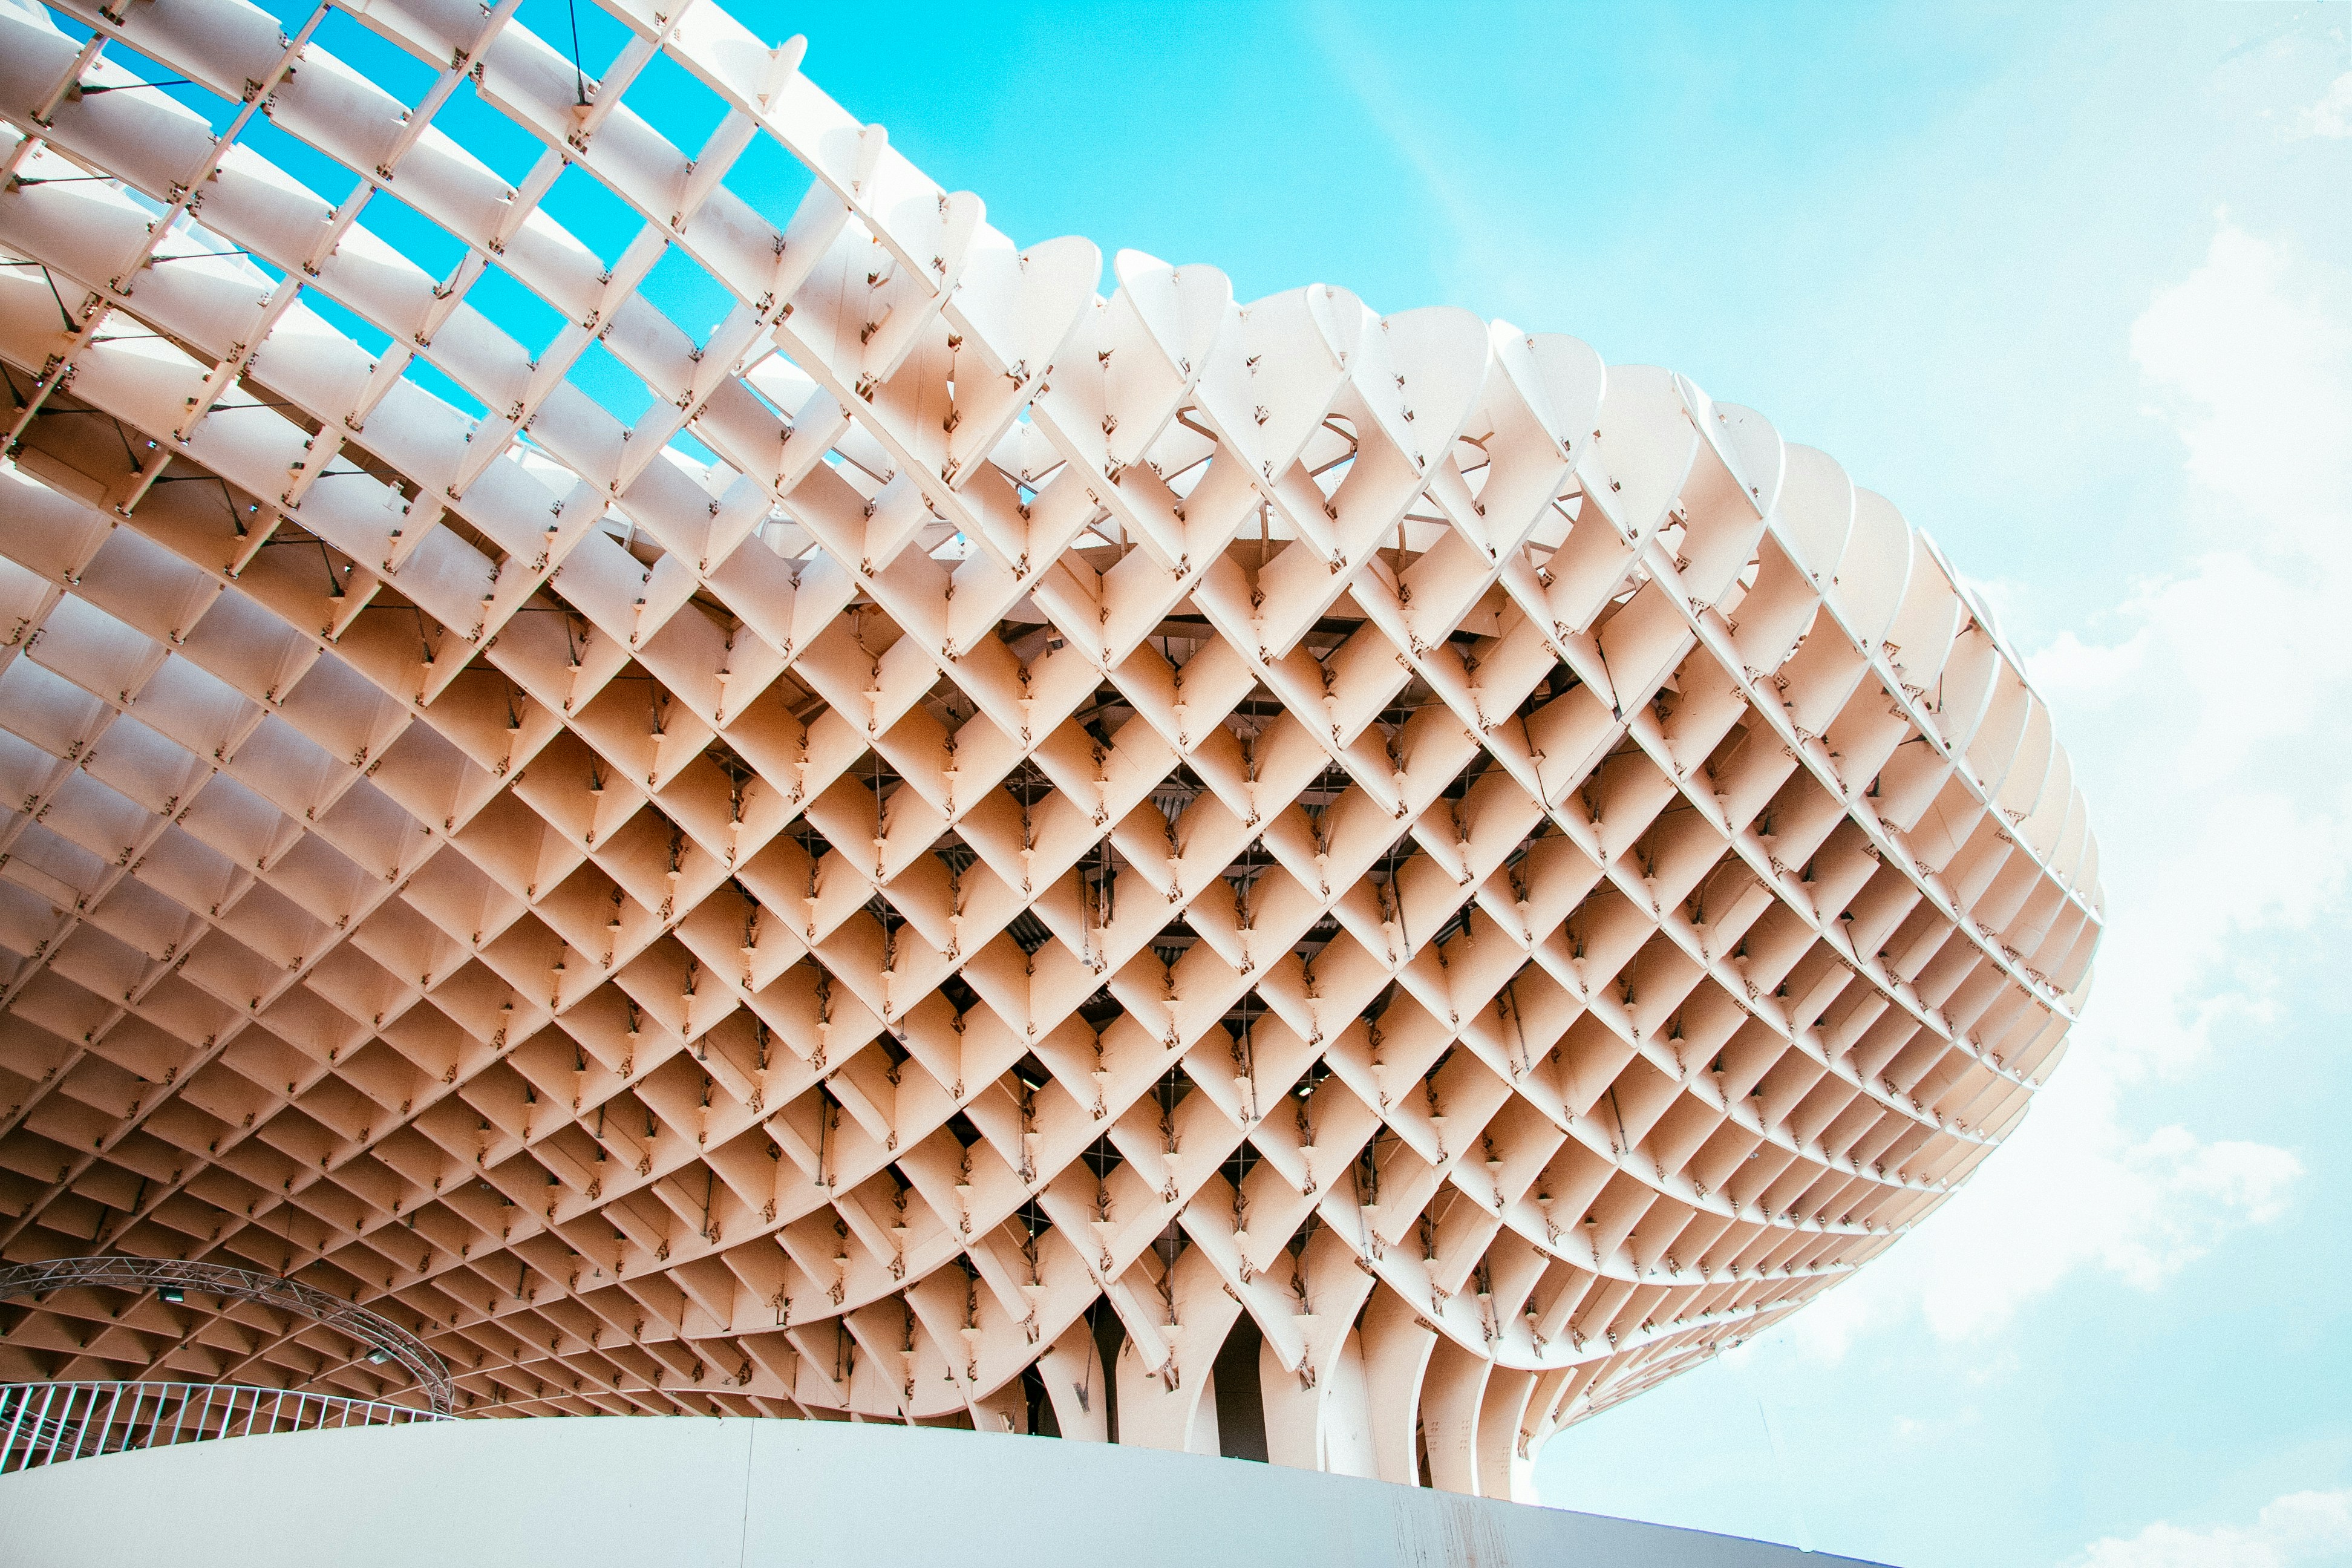 Metropol Parasol is a wooden structure located at La Encarnación square, in the old quarter of Sevilla, Spain. Designed by the German architect Jürgen Mayer and completed in April 2011